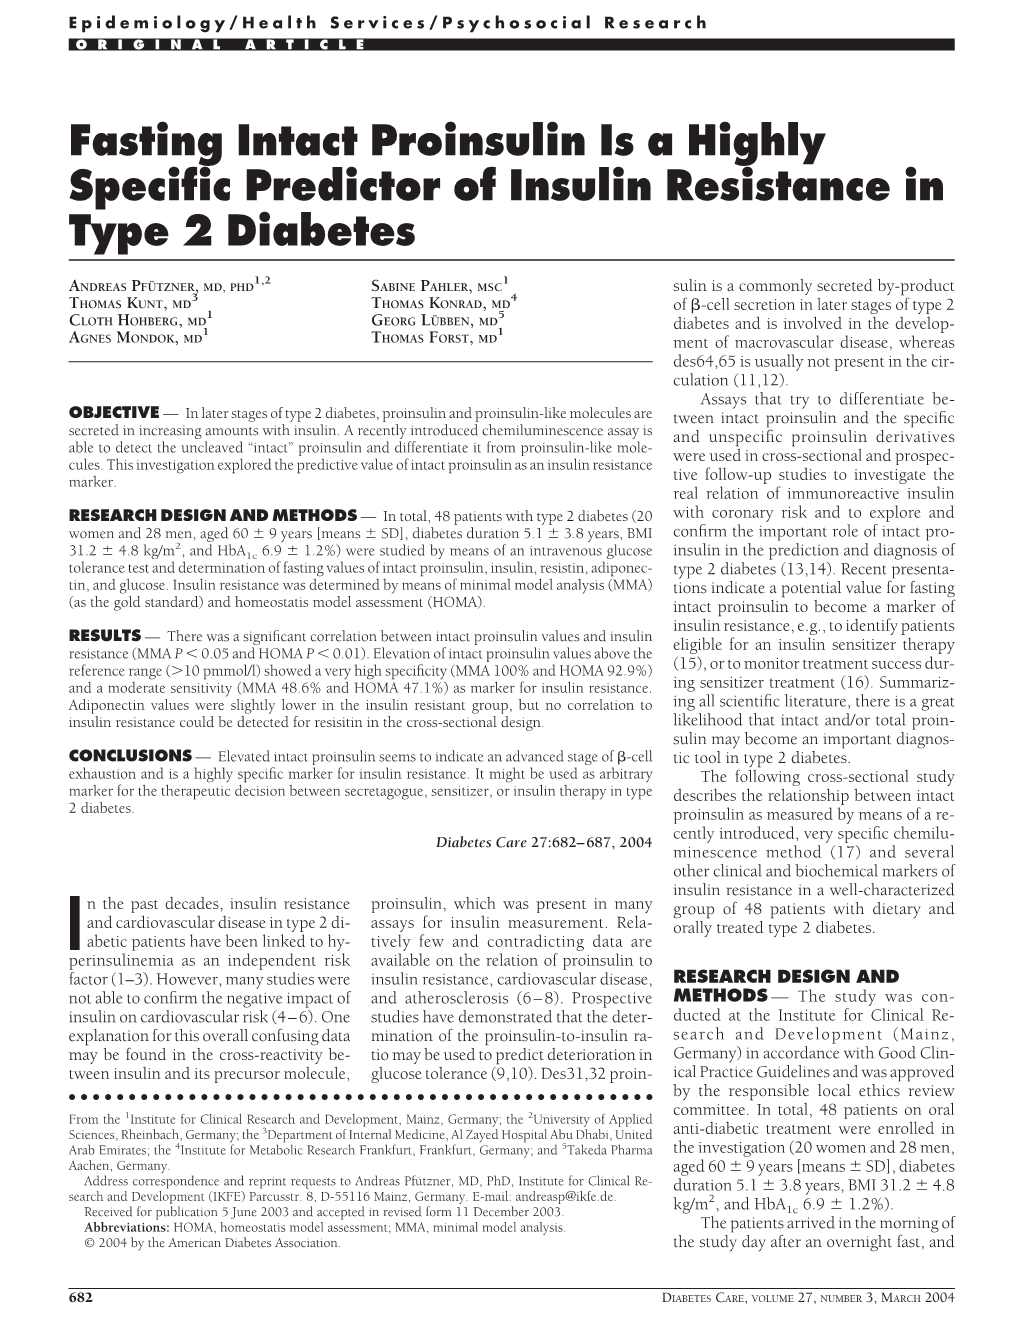 Fasting Intact Proinsulin Is a Highly Specific Predictor of Insulin